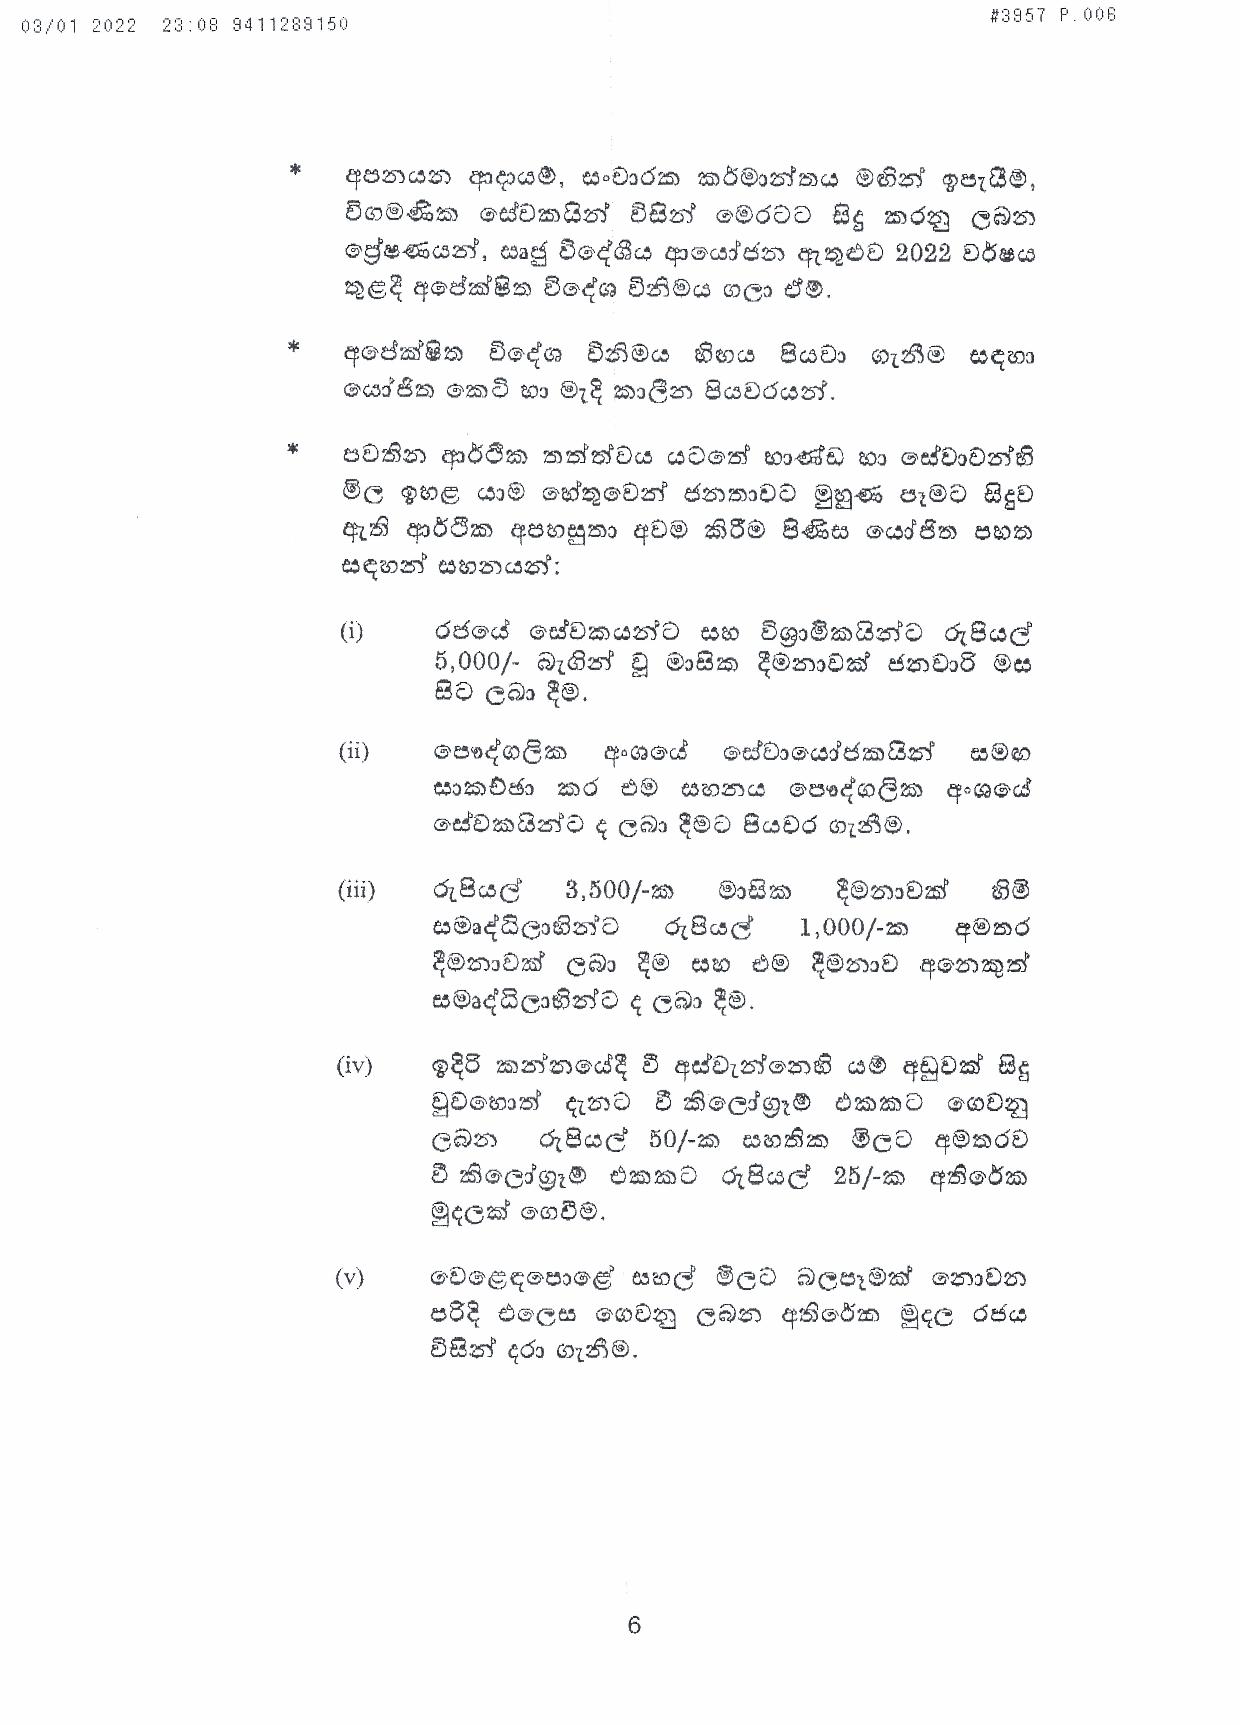 Cabinet Decision on 03.01.2022 page 001